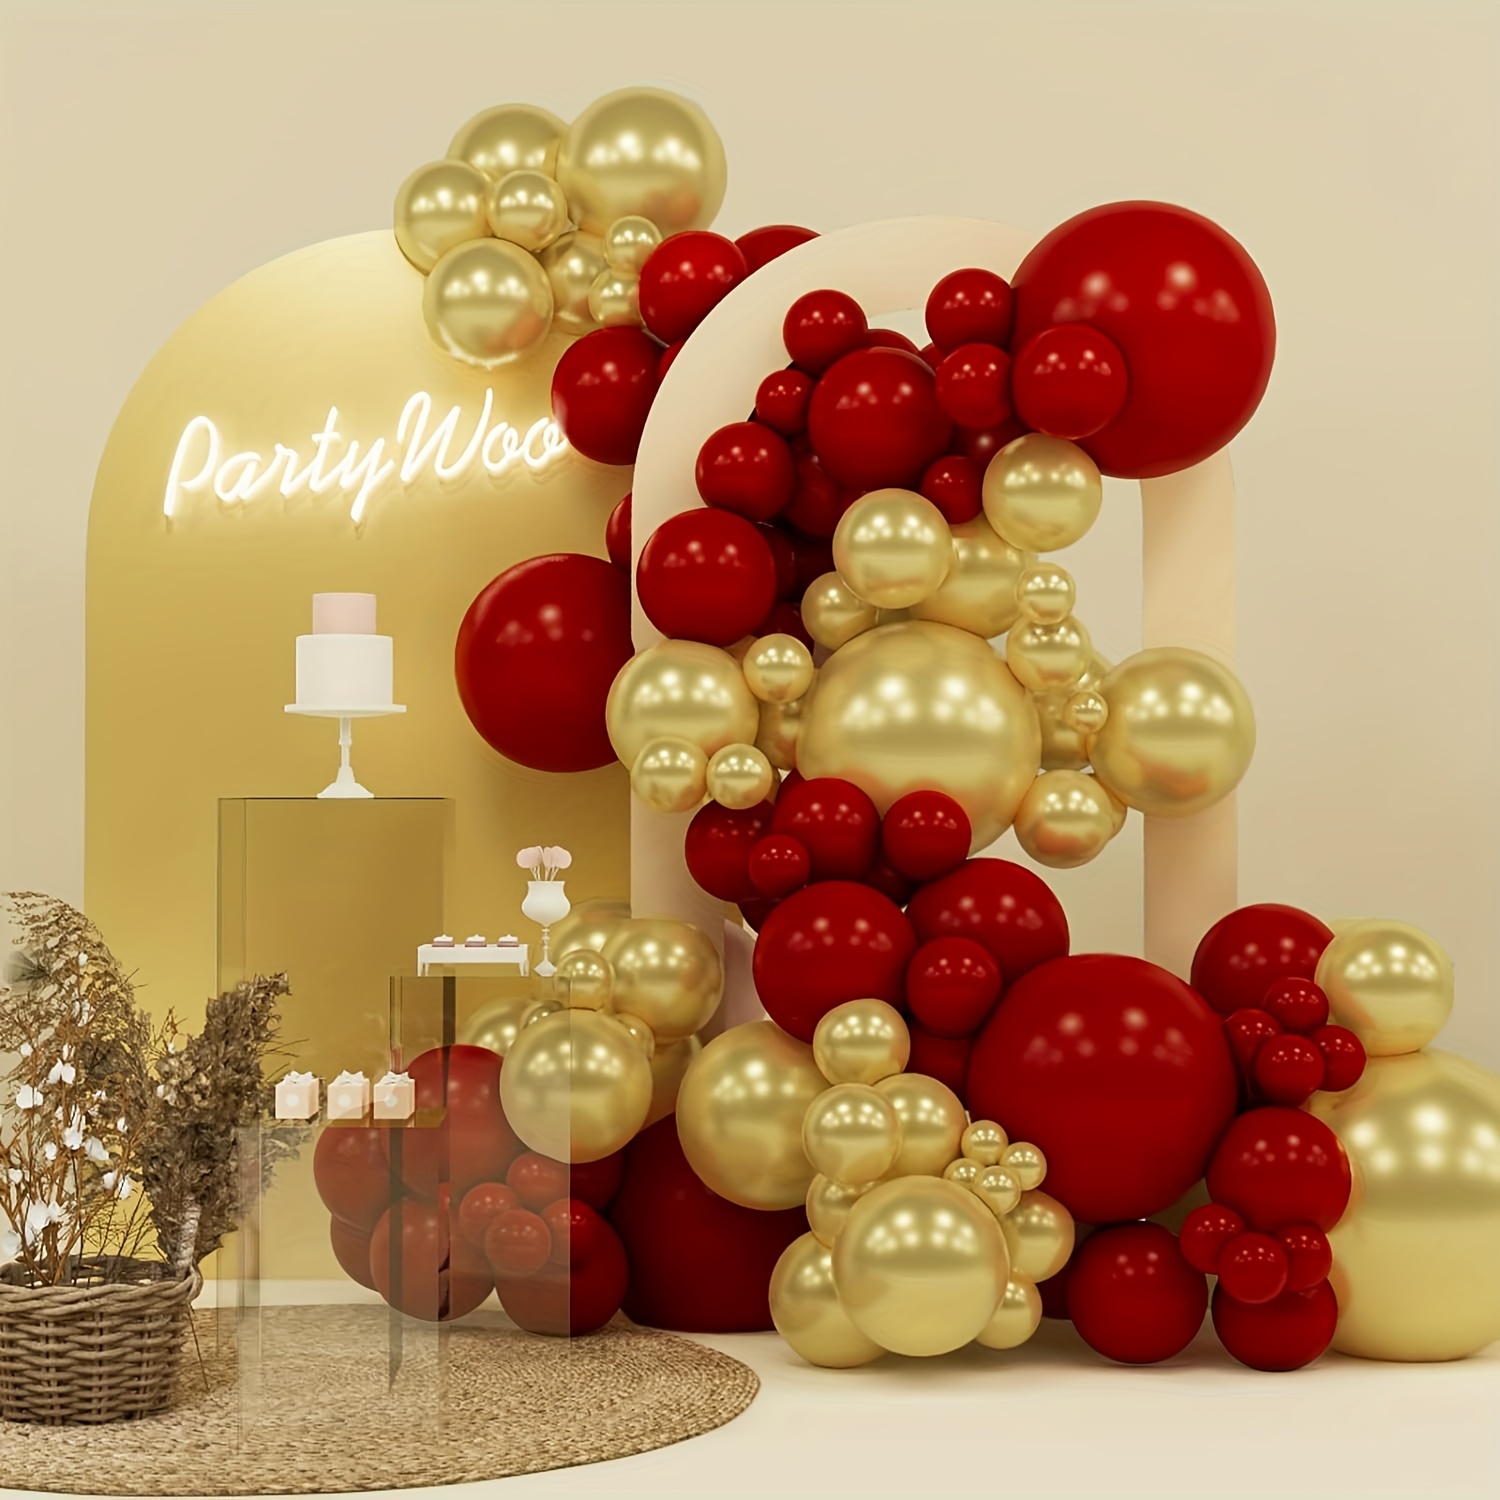 PartyWoo Burgundy Black Balloons, Red and Black Balloons, Gold Black and  Red Balloons, Burgundy Balloons, Metallic Gold Balloons for Red and Black